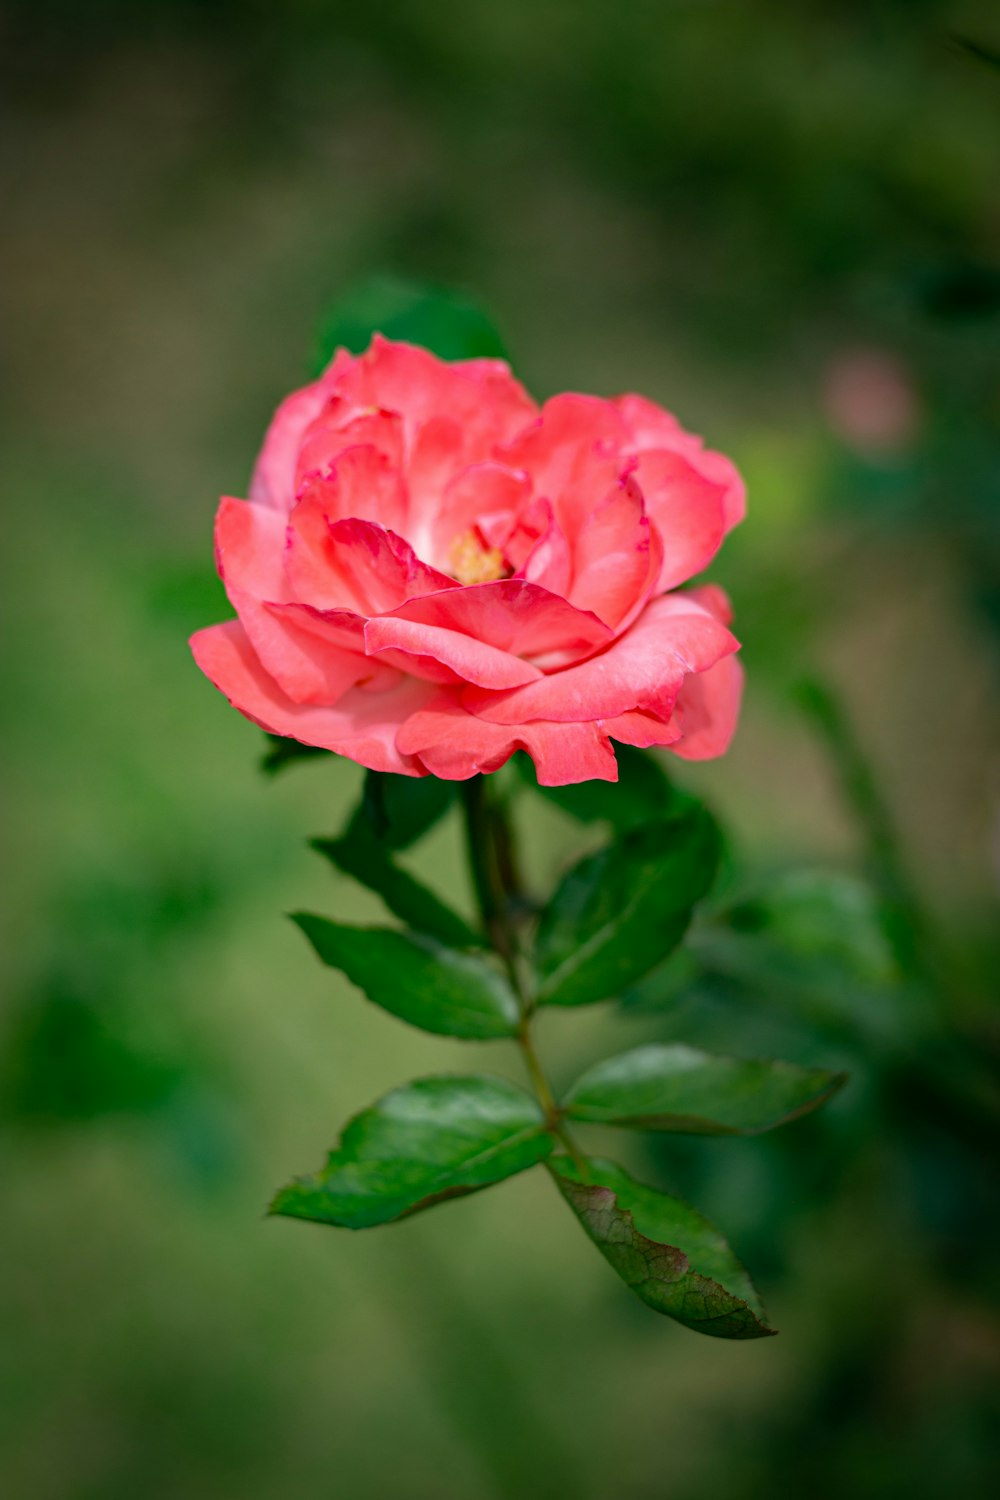 a single pink flower with green leaves